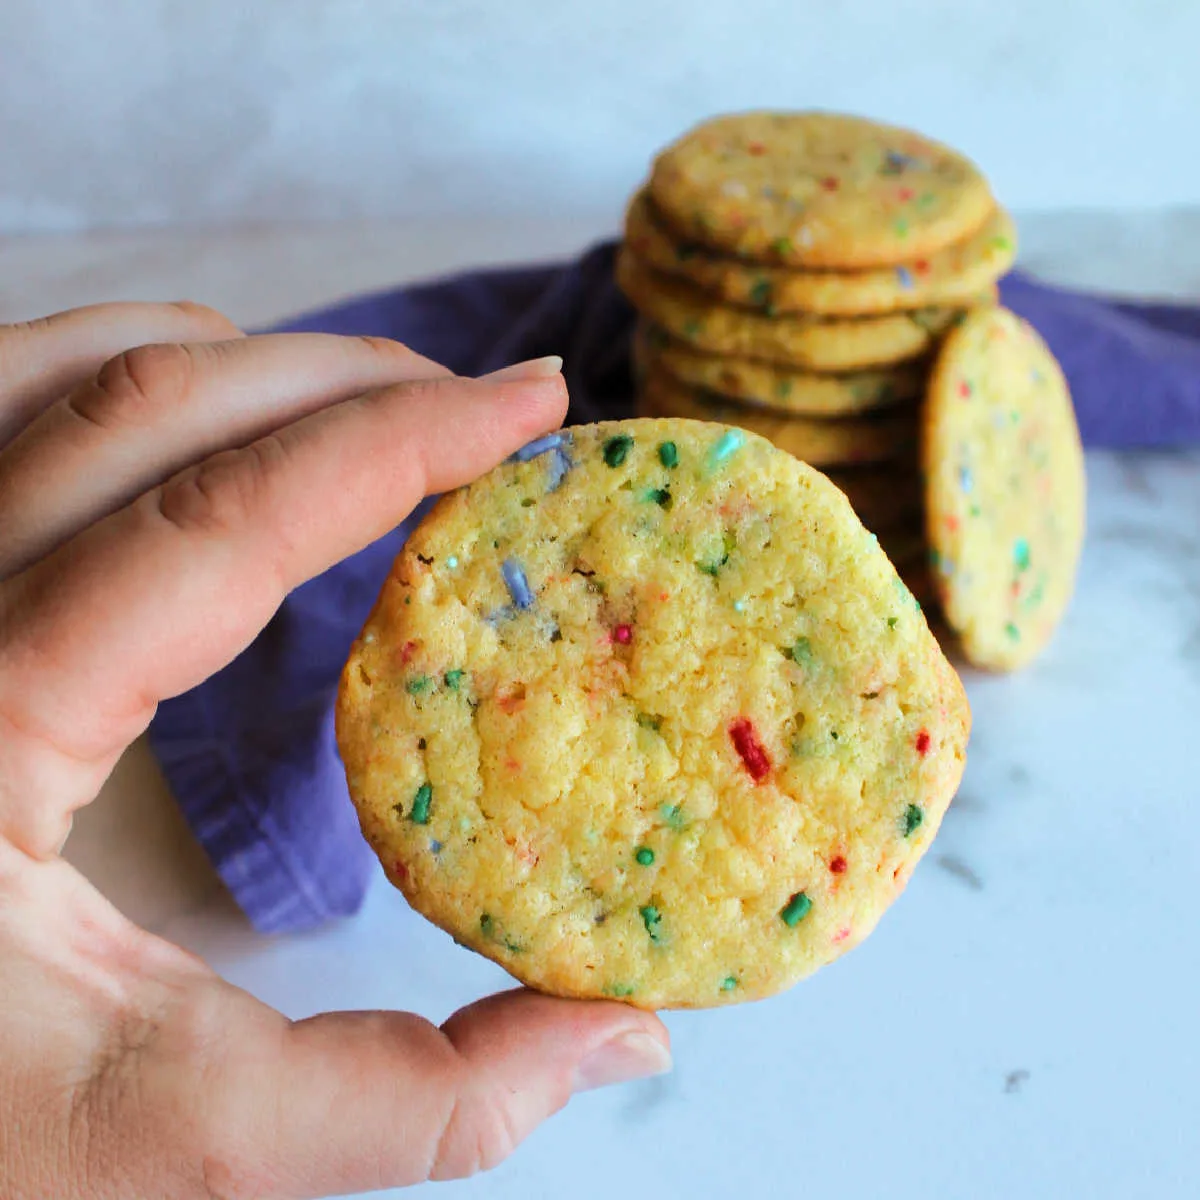 Hand holding vanilla cake mix cookies with colorful sprinkles baked inside.